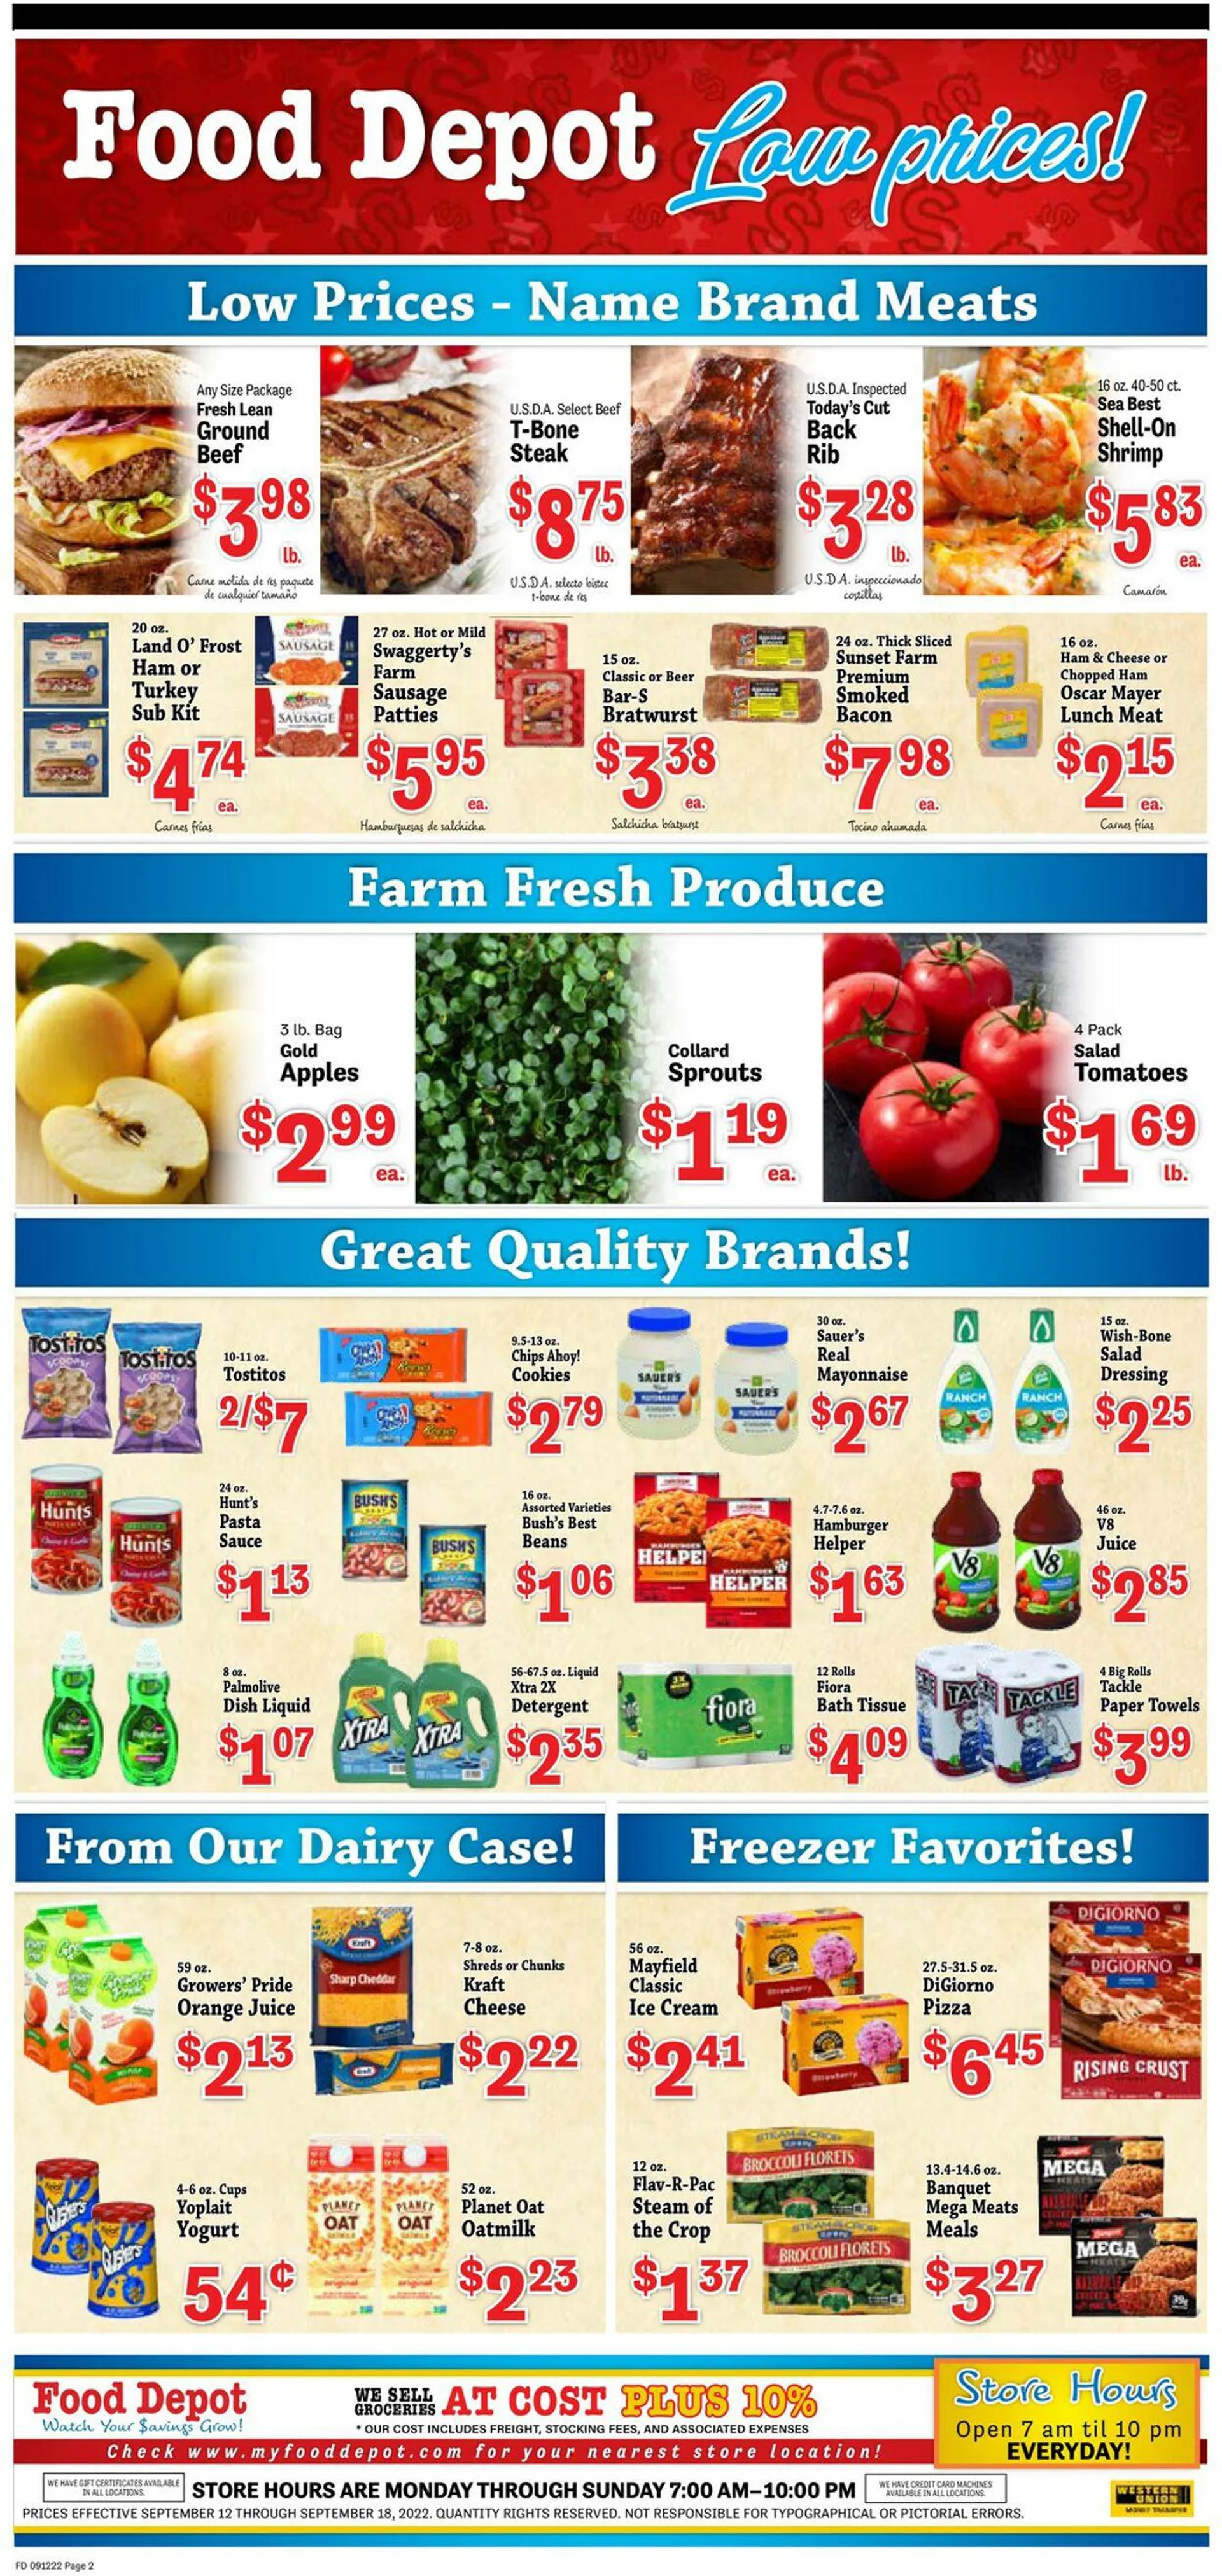 Food Depot Current weekly ad - 2